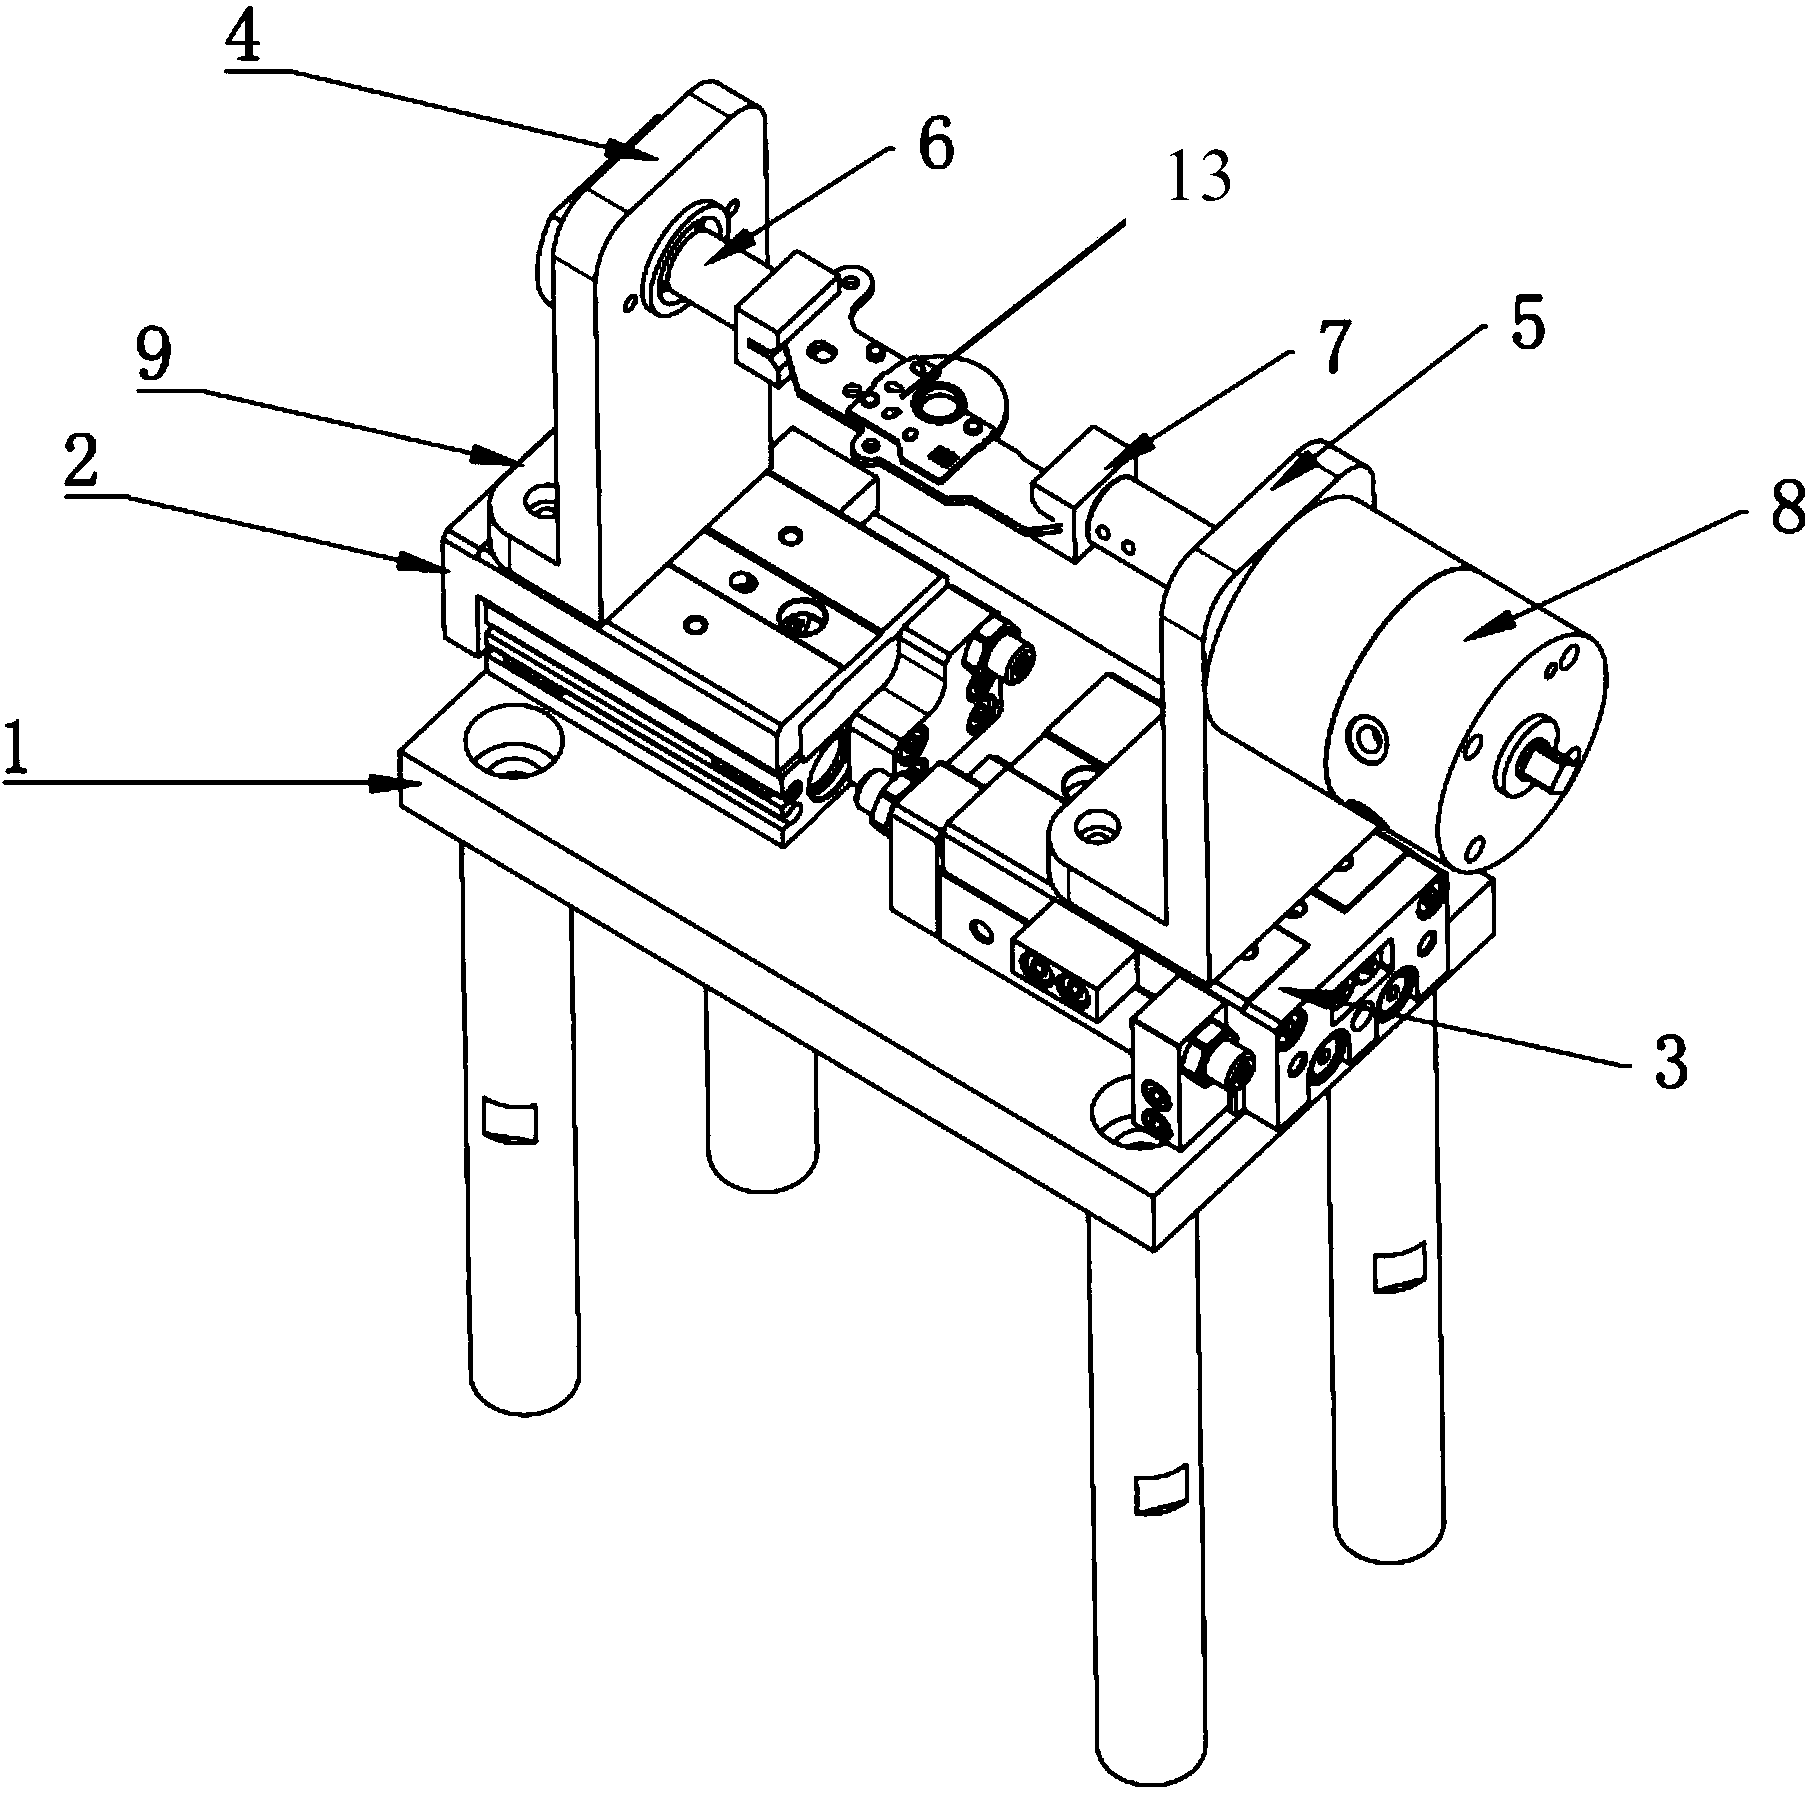 Automatic turnover mechanism